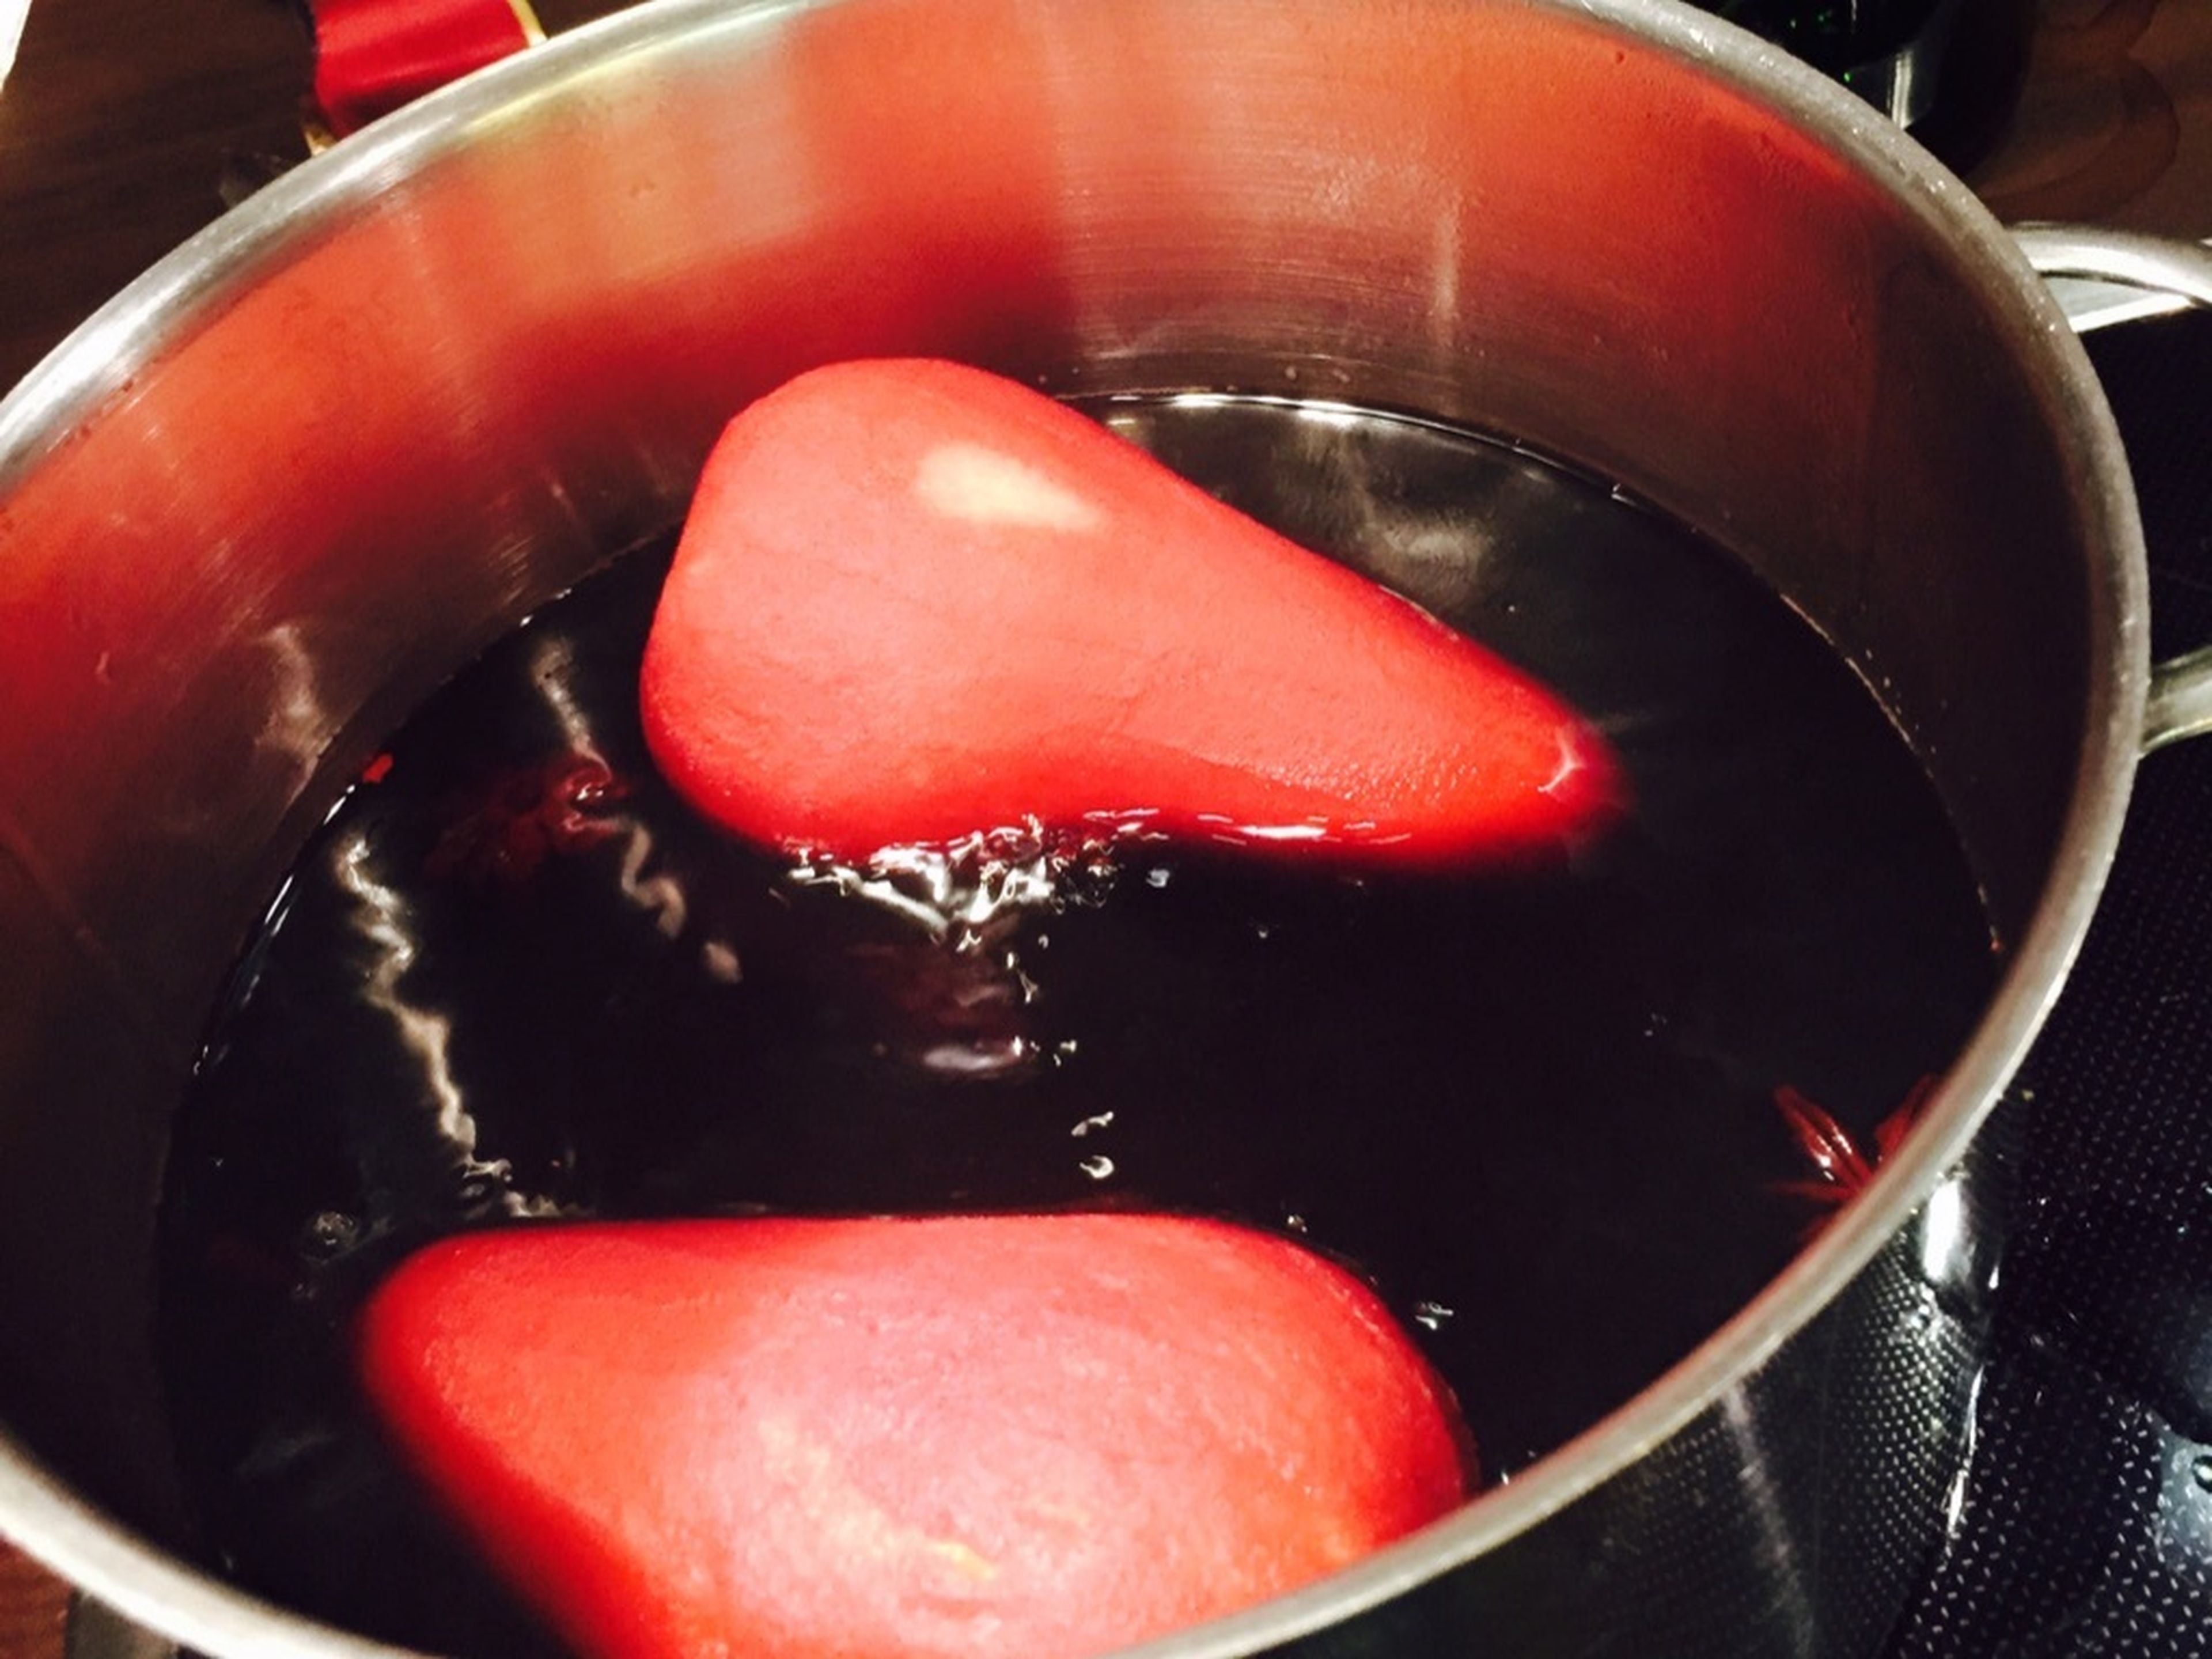 Bring to a boil, then simmer on low heat for approx. 60 min. Turn the pears every 20 min.